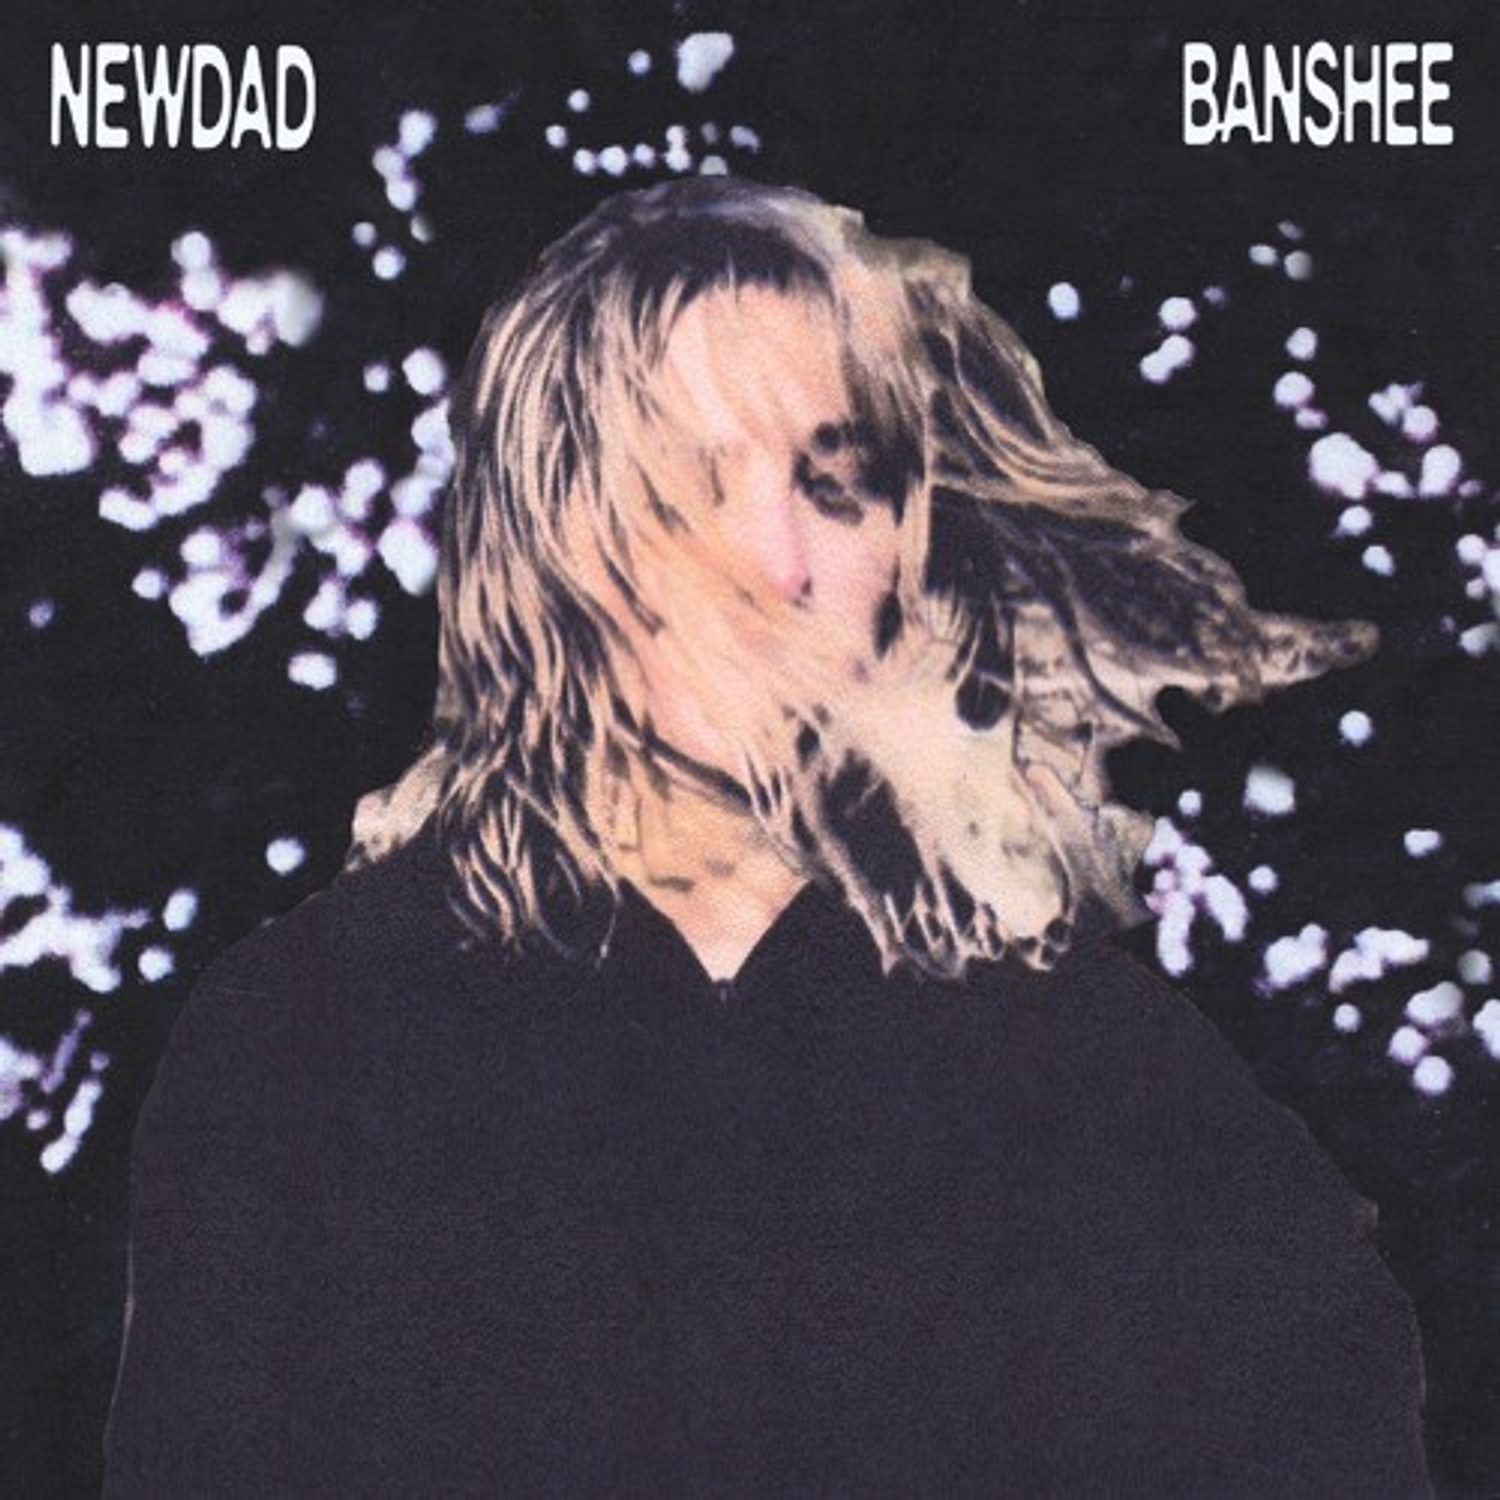 <strong>NewDad</strong> - Banshee